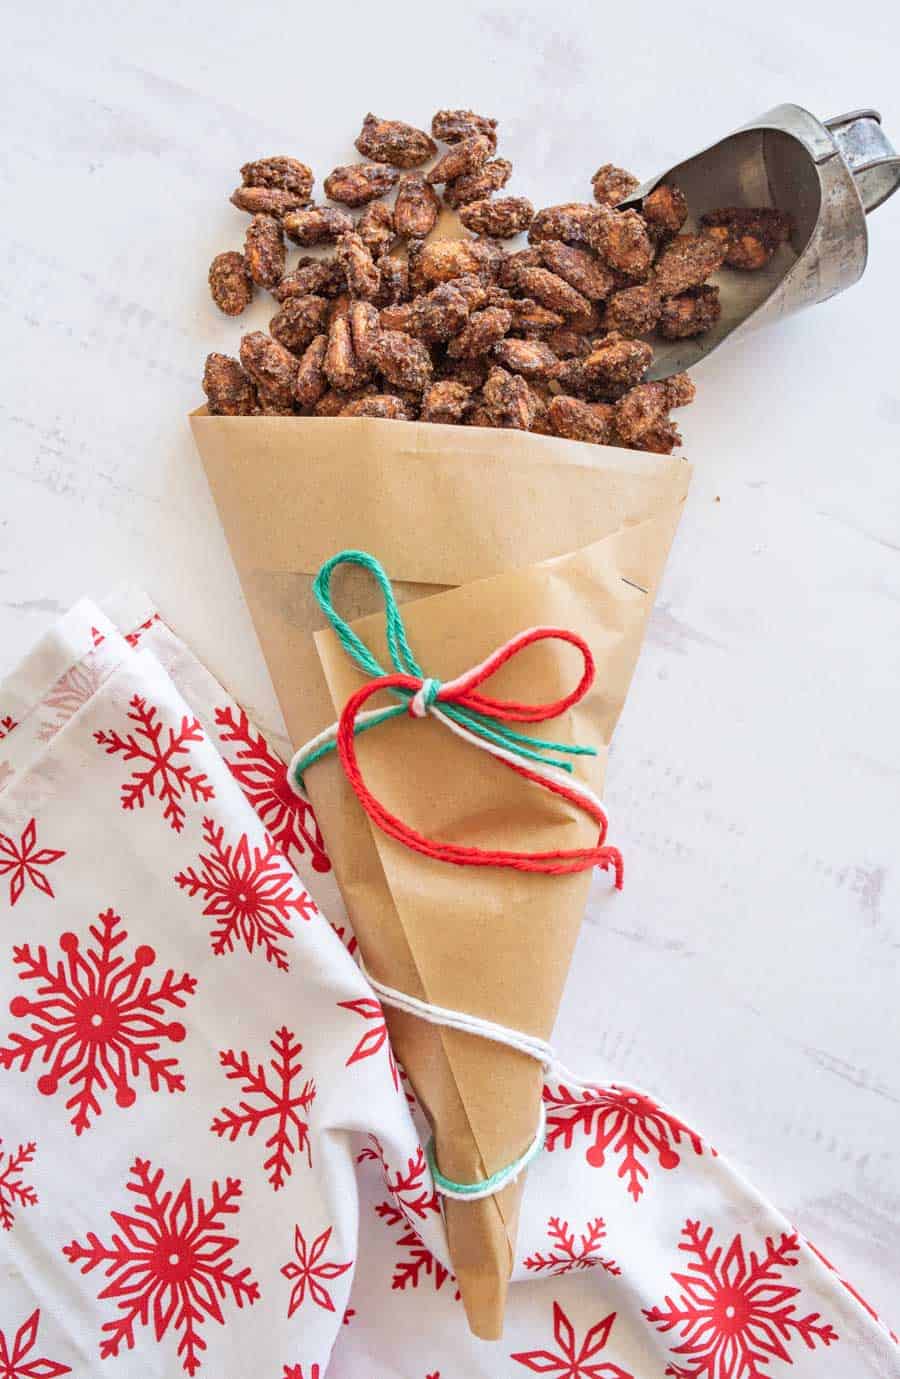 Top view of cinnamon candied almonds spilling out of a brown paper bag tied with green, red, and white yarn.